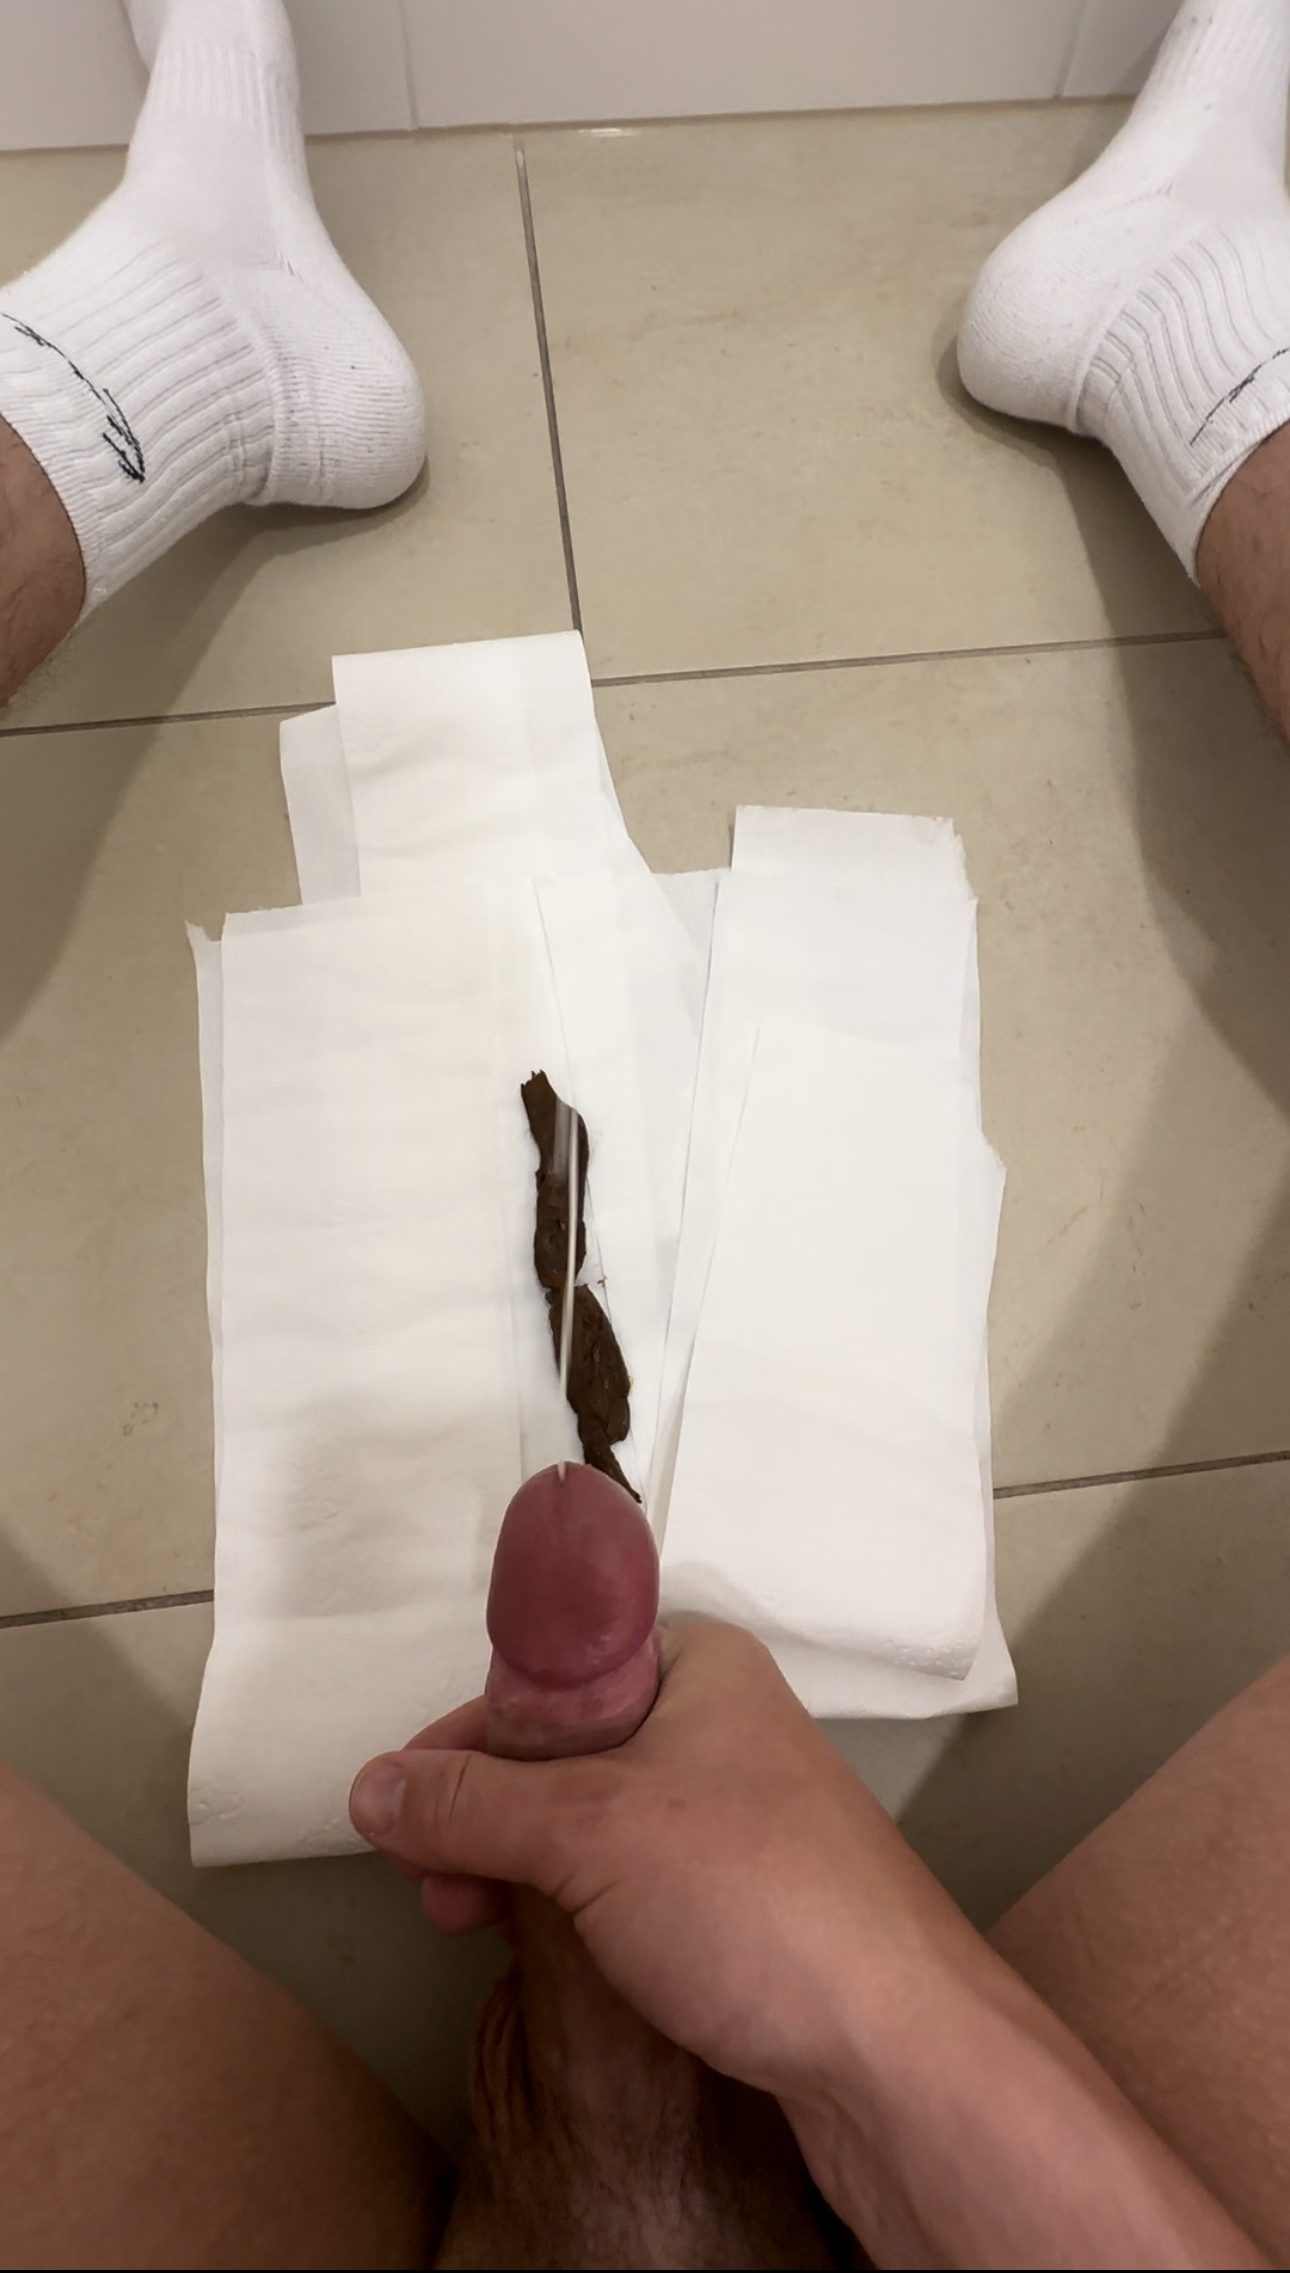 Hot guy with White socks pooping and jerking